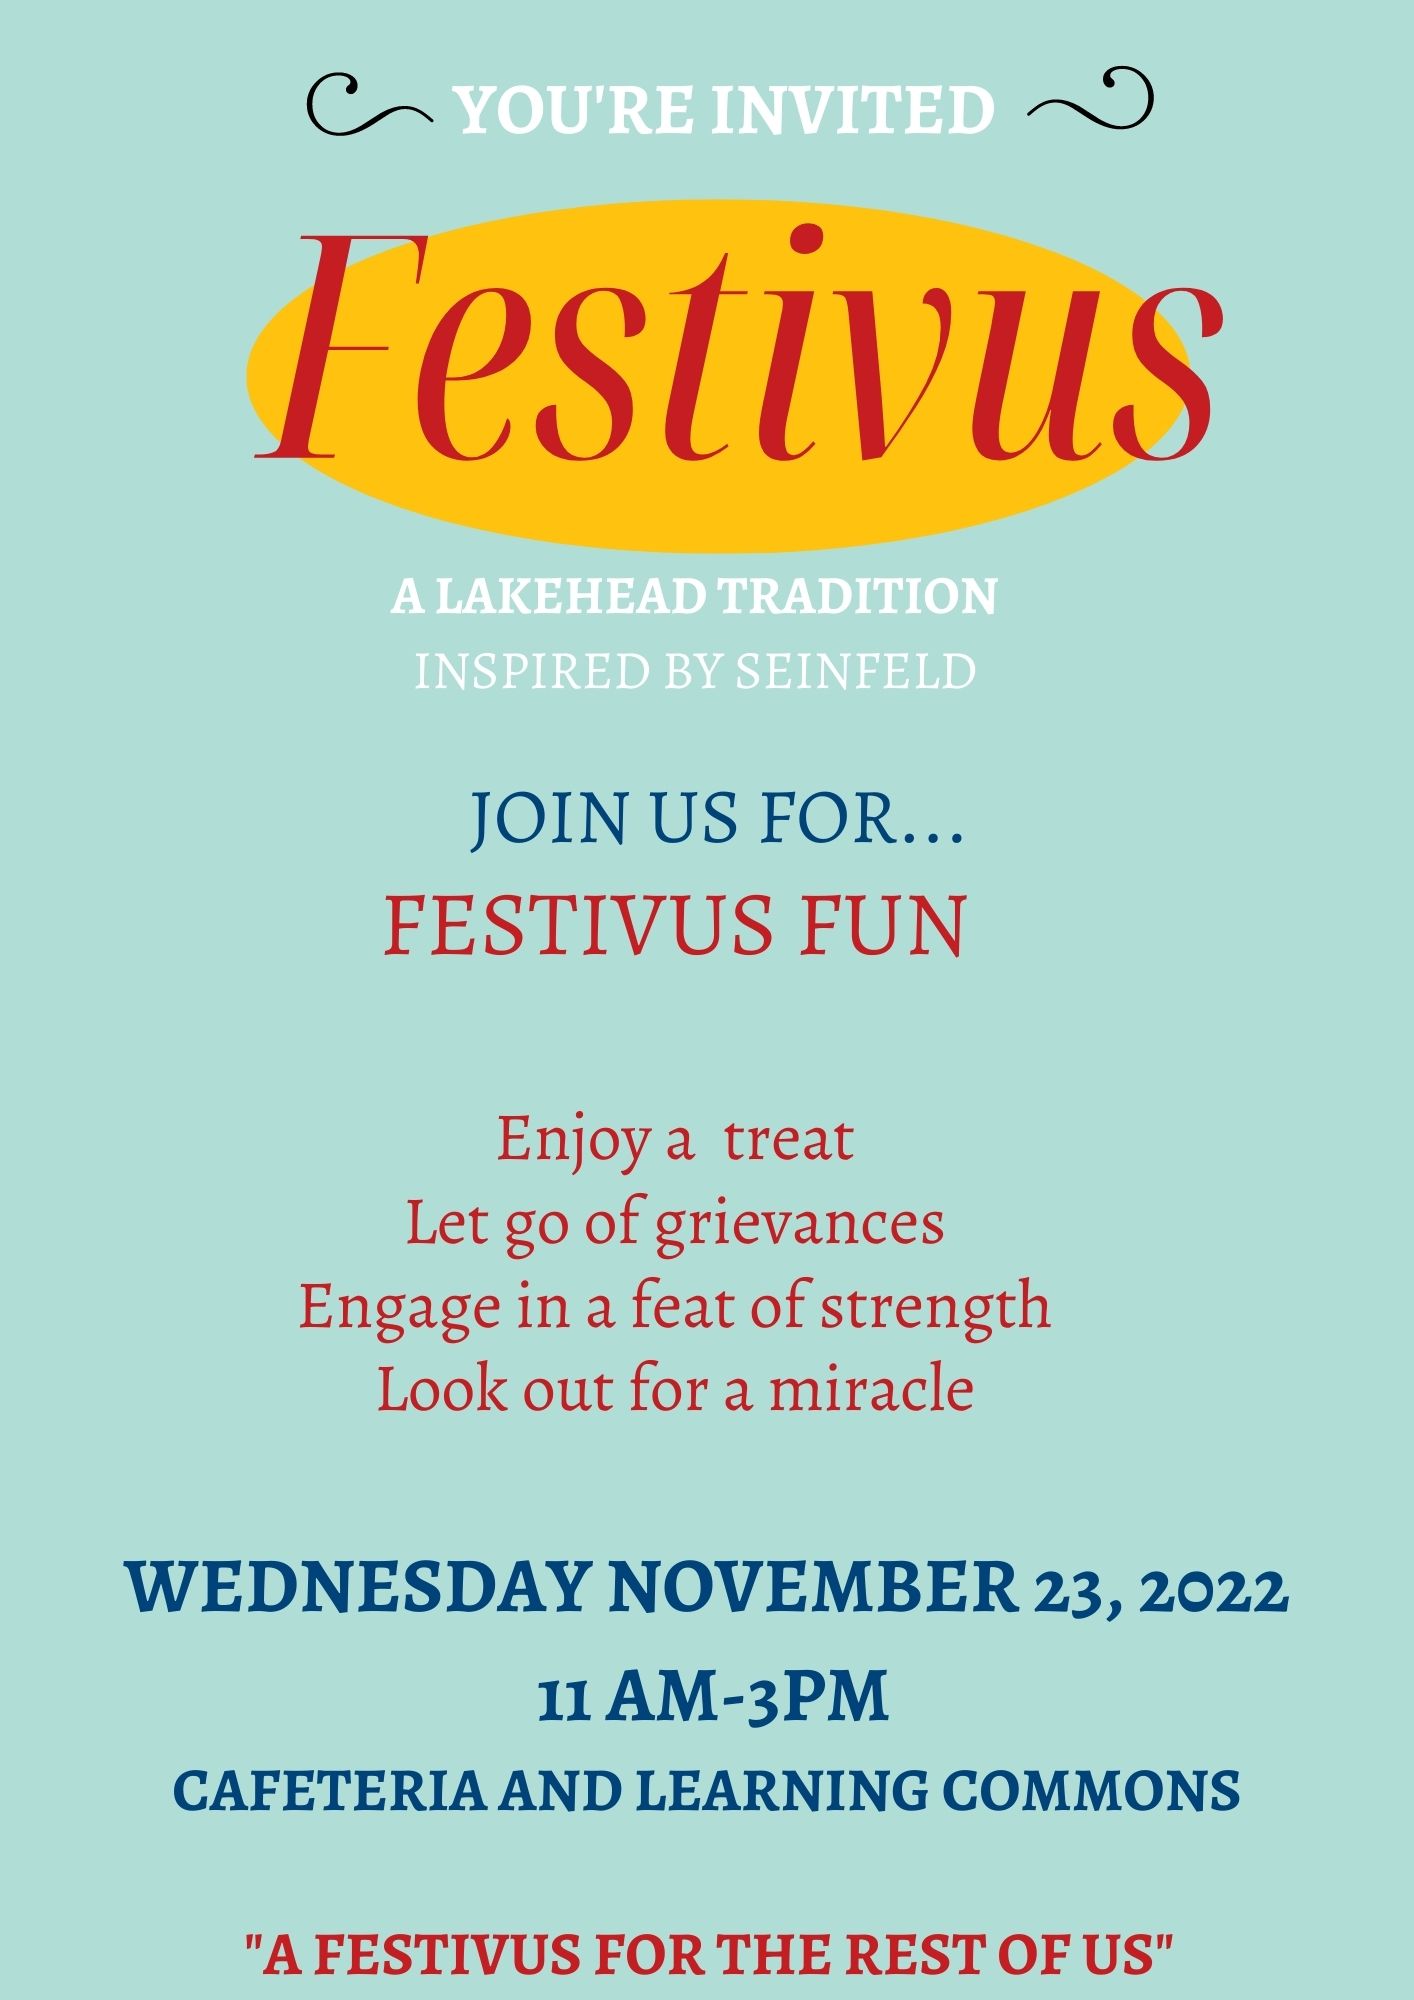 You're invited to Festivus